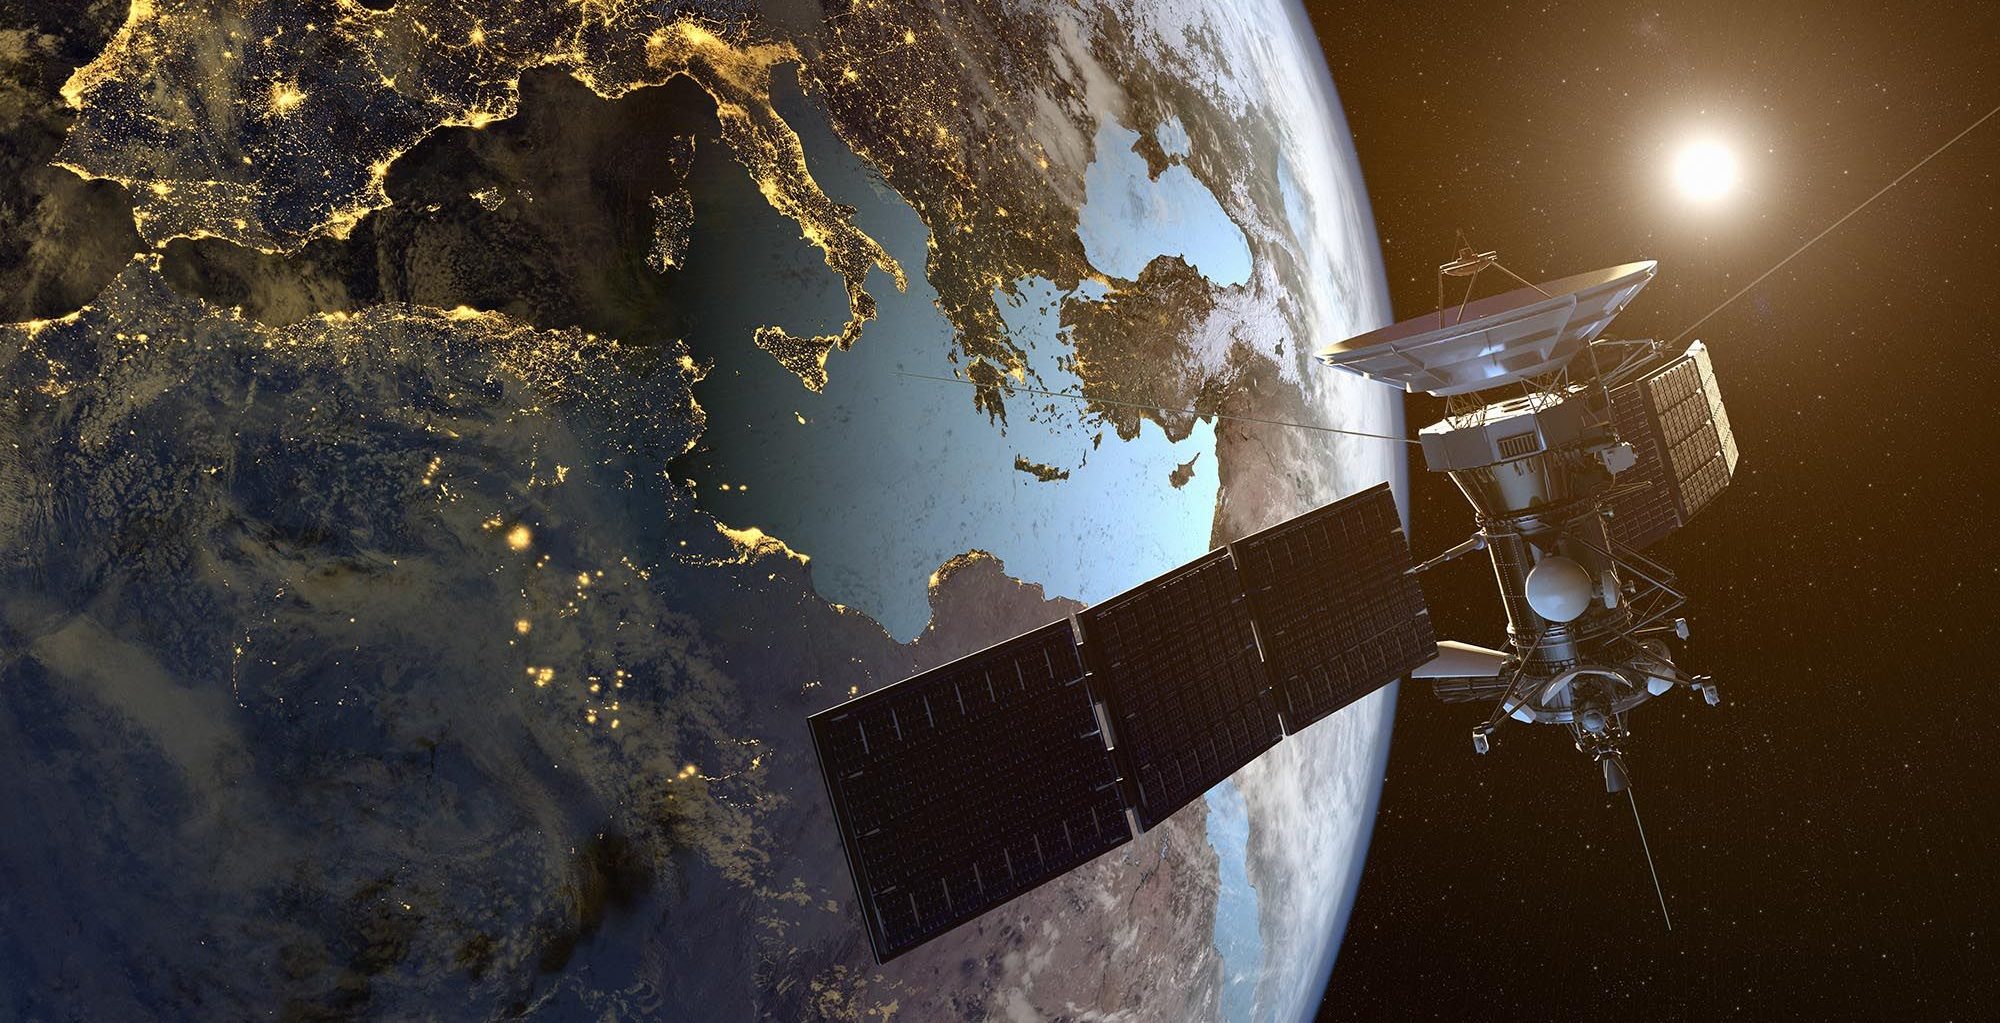 Espionage in orbit: Russian satellite is caught spying on another satellite